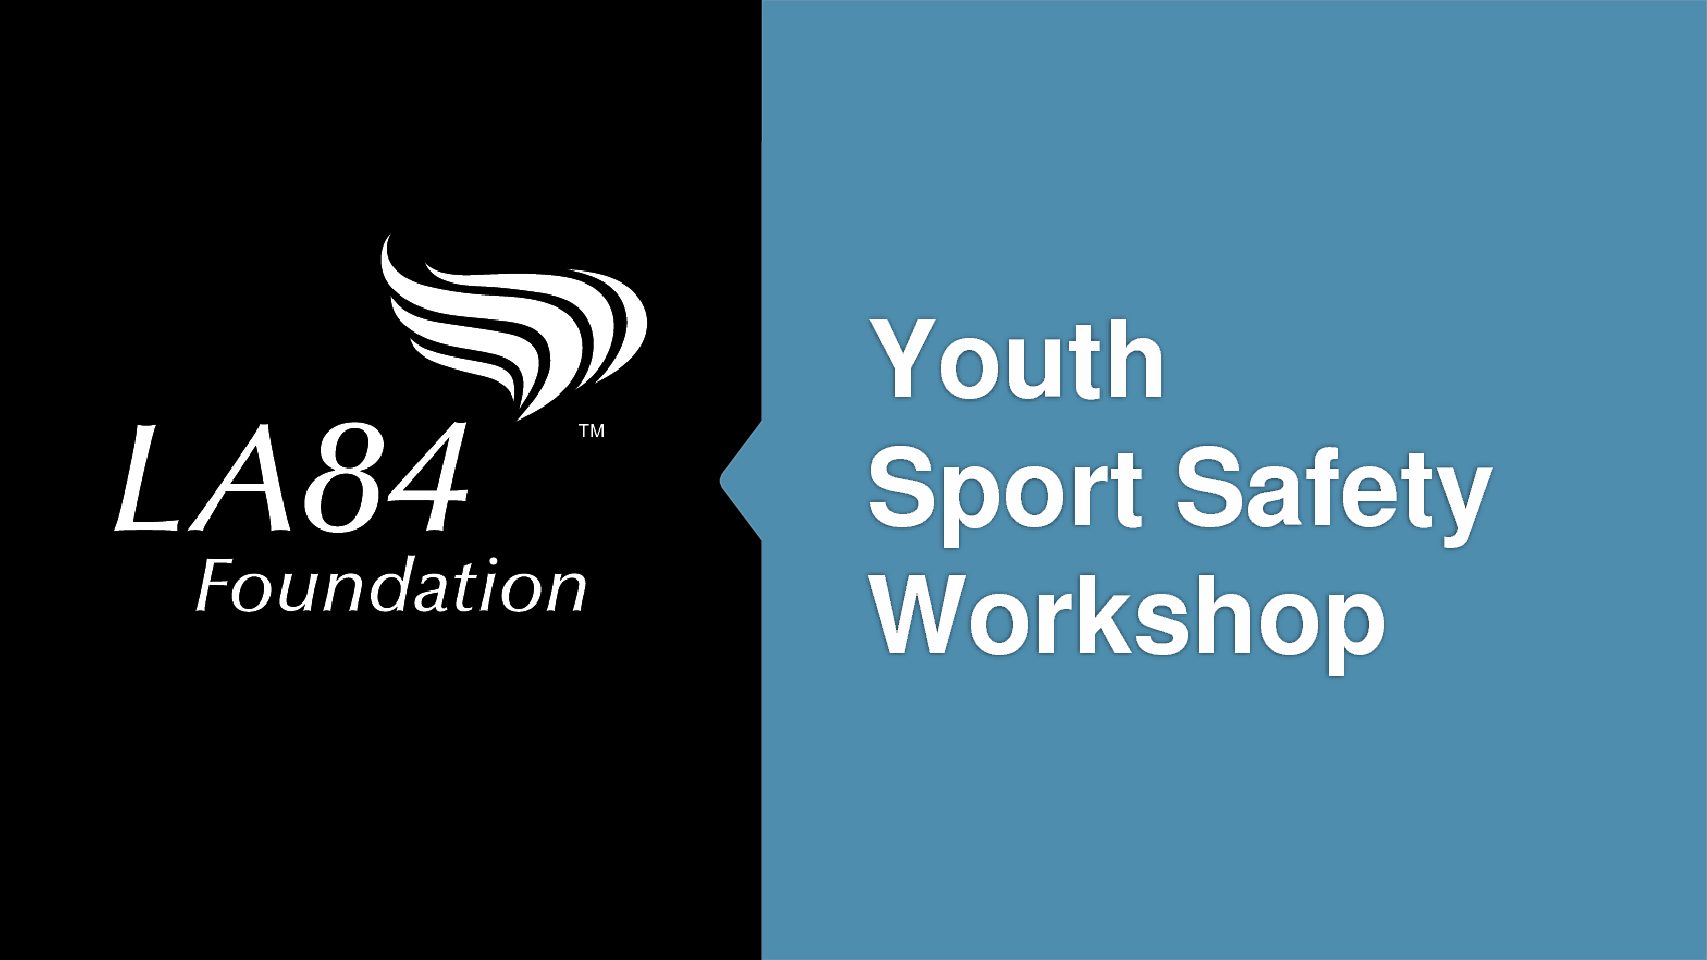 Youth Safety Workshops PPT for Preventing Sexual Abuse image